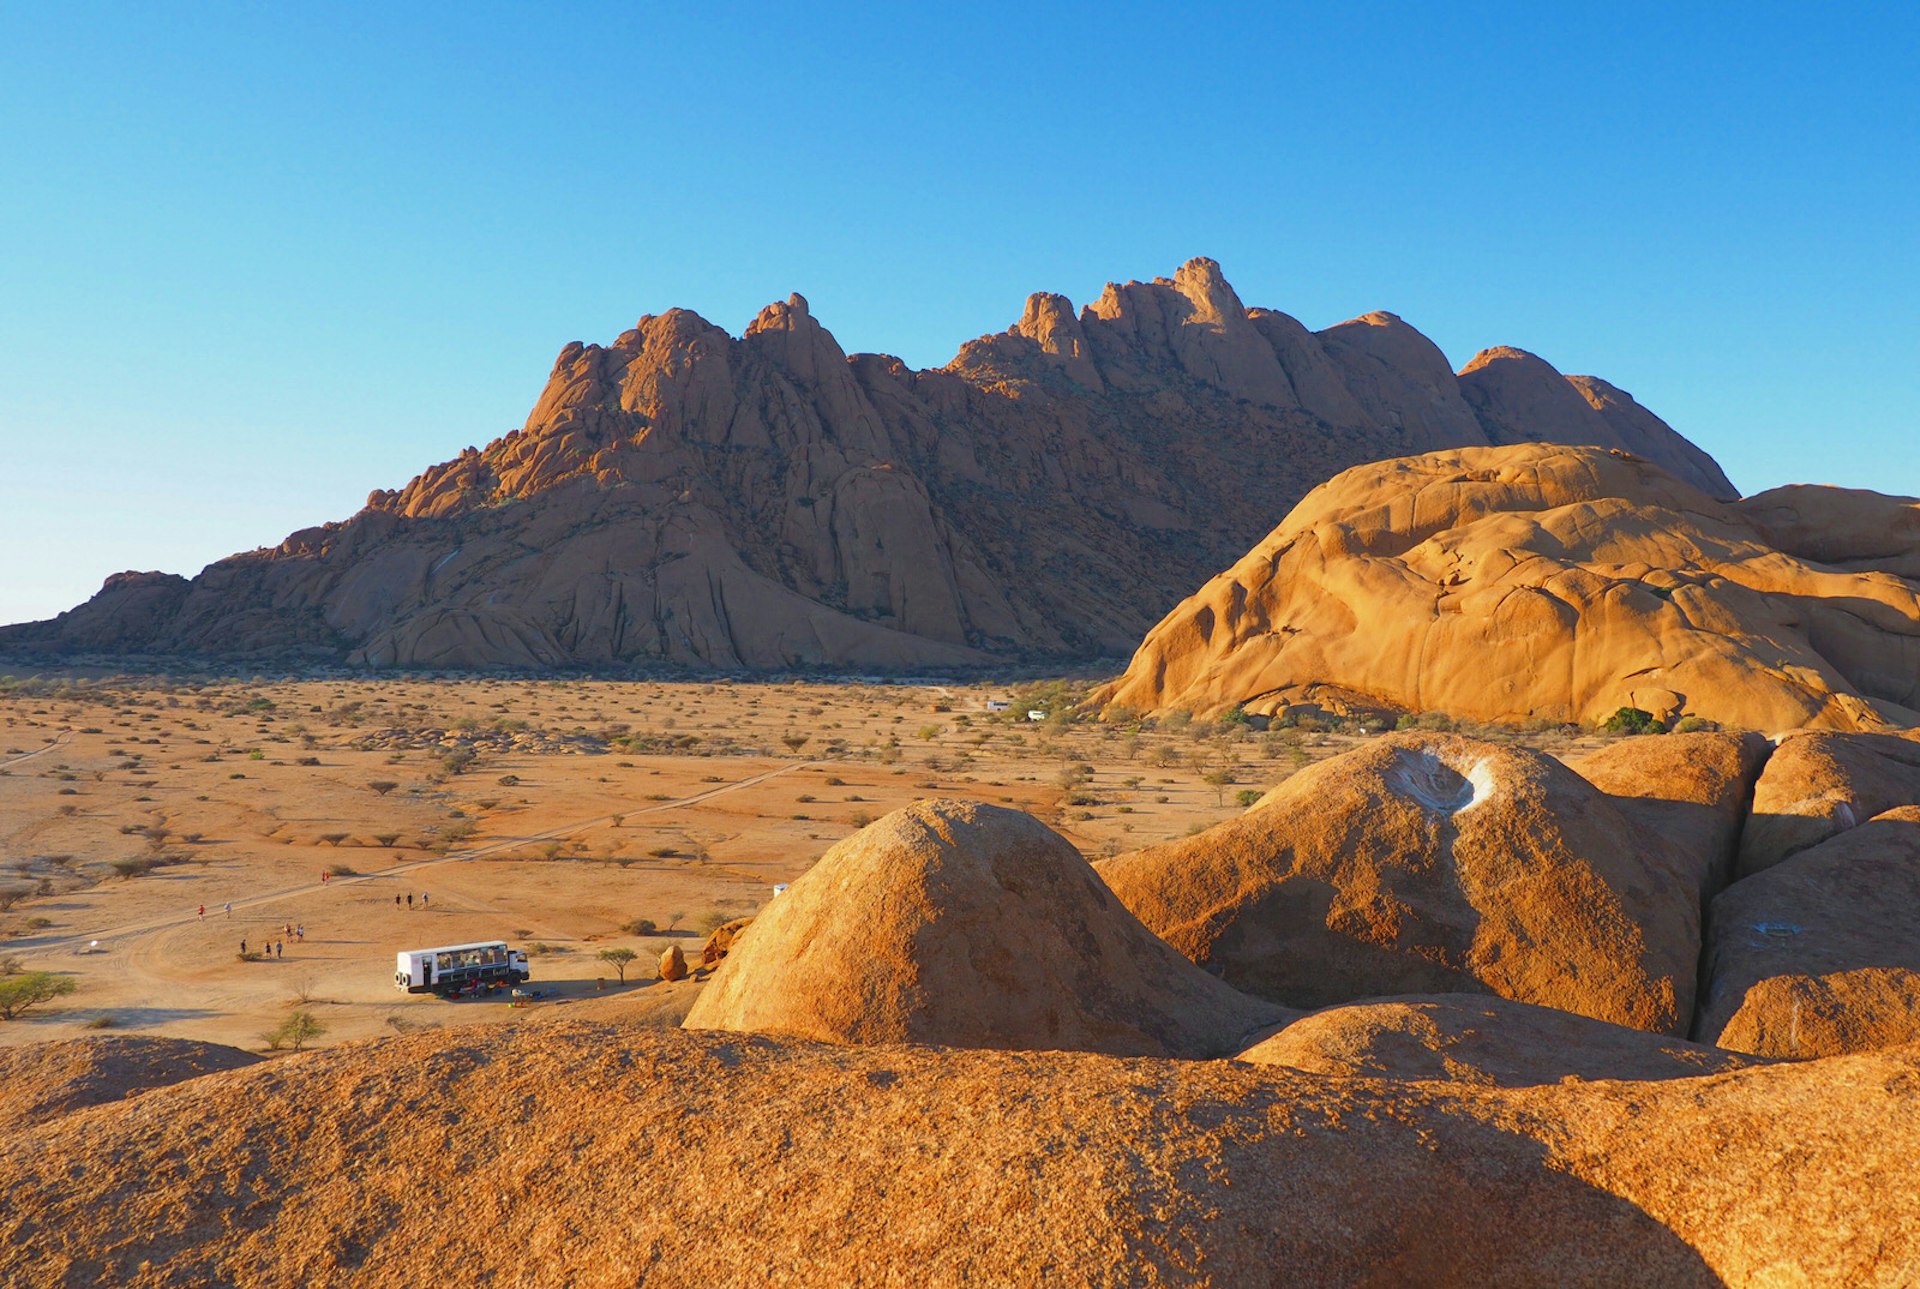 A large overland truck looks much like a toy brick as it sits on the red Namibian soil surrounded by massive, bulbous rock monoliths at Spitzkoppe @ Sarah Reid / Lonely Planet